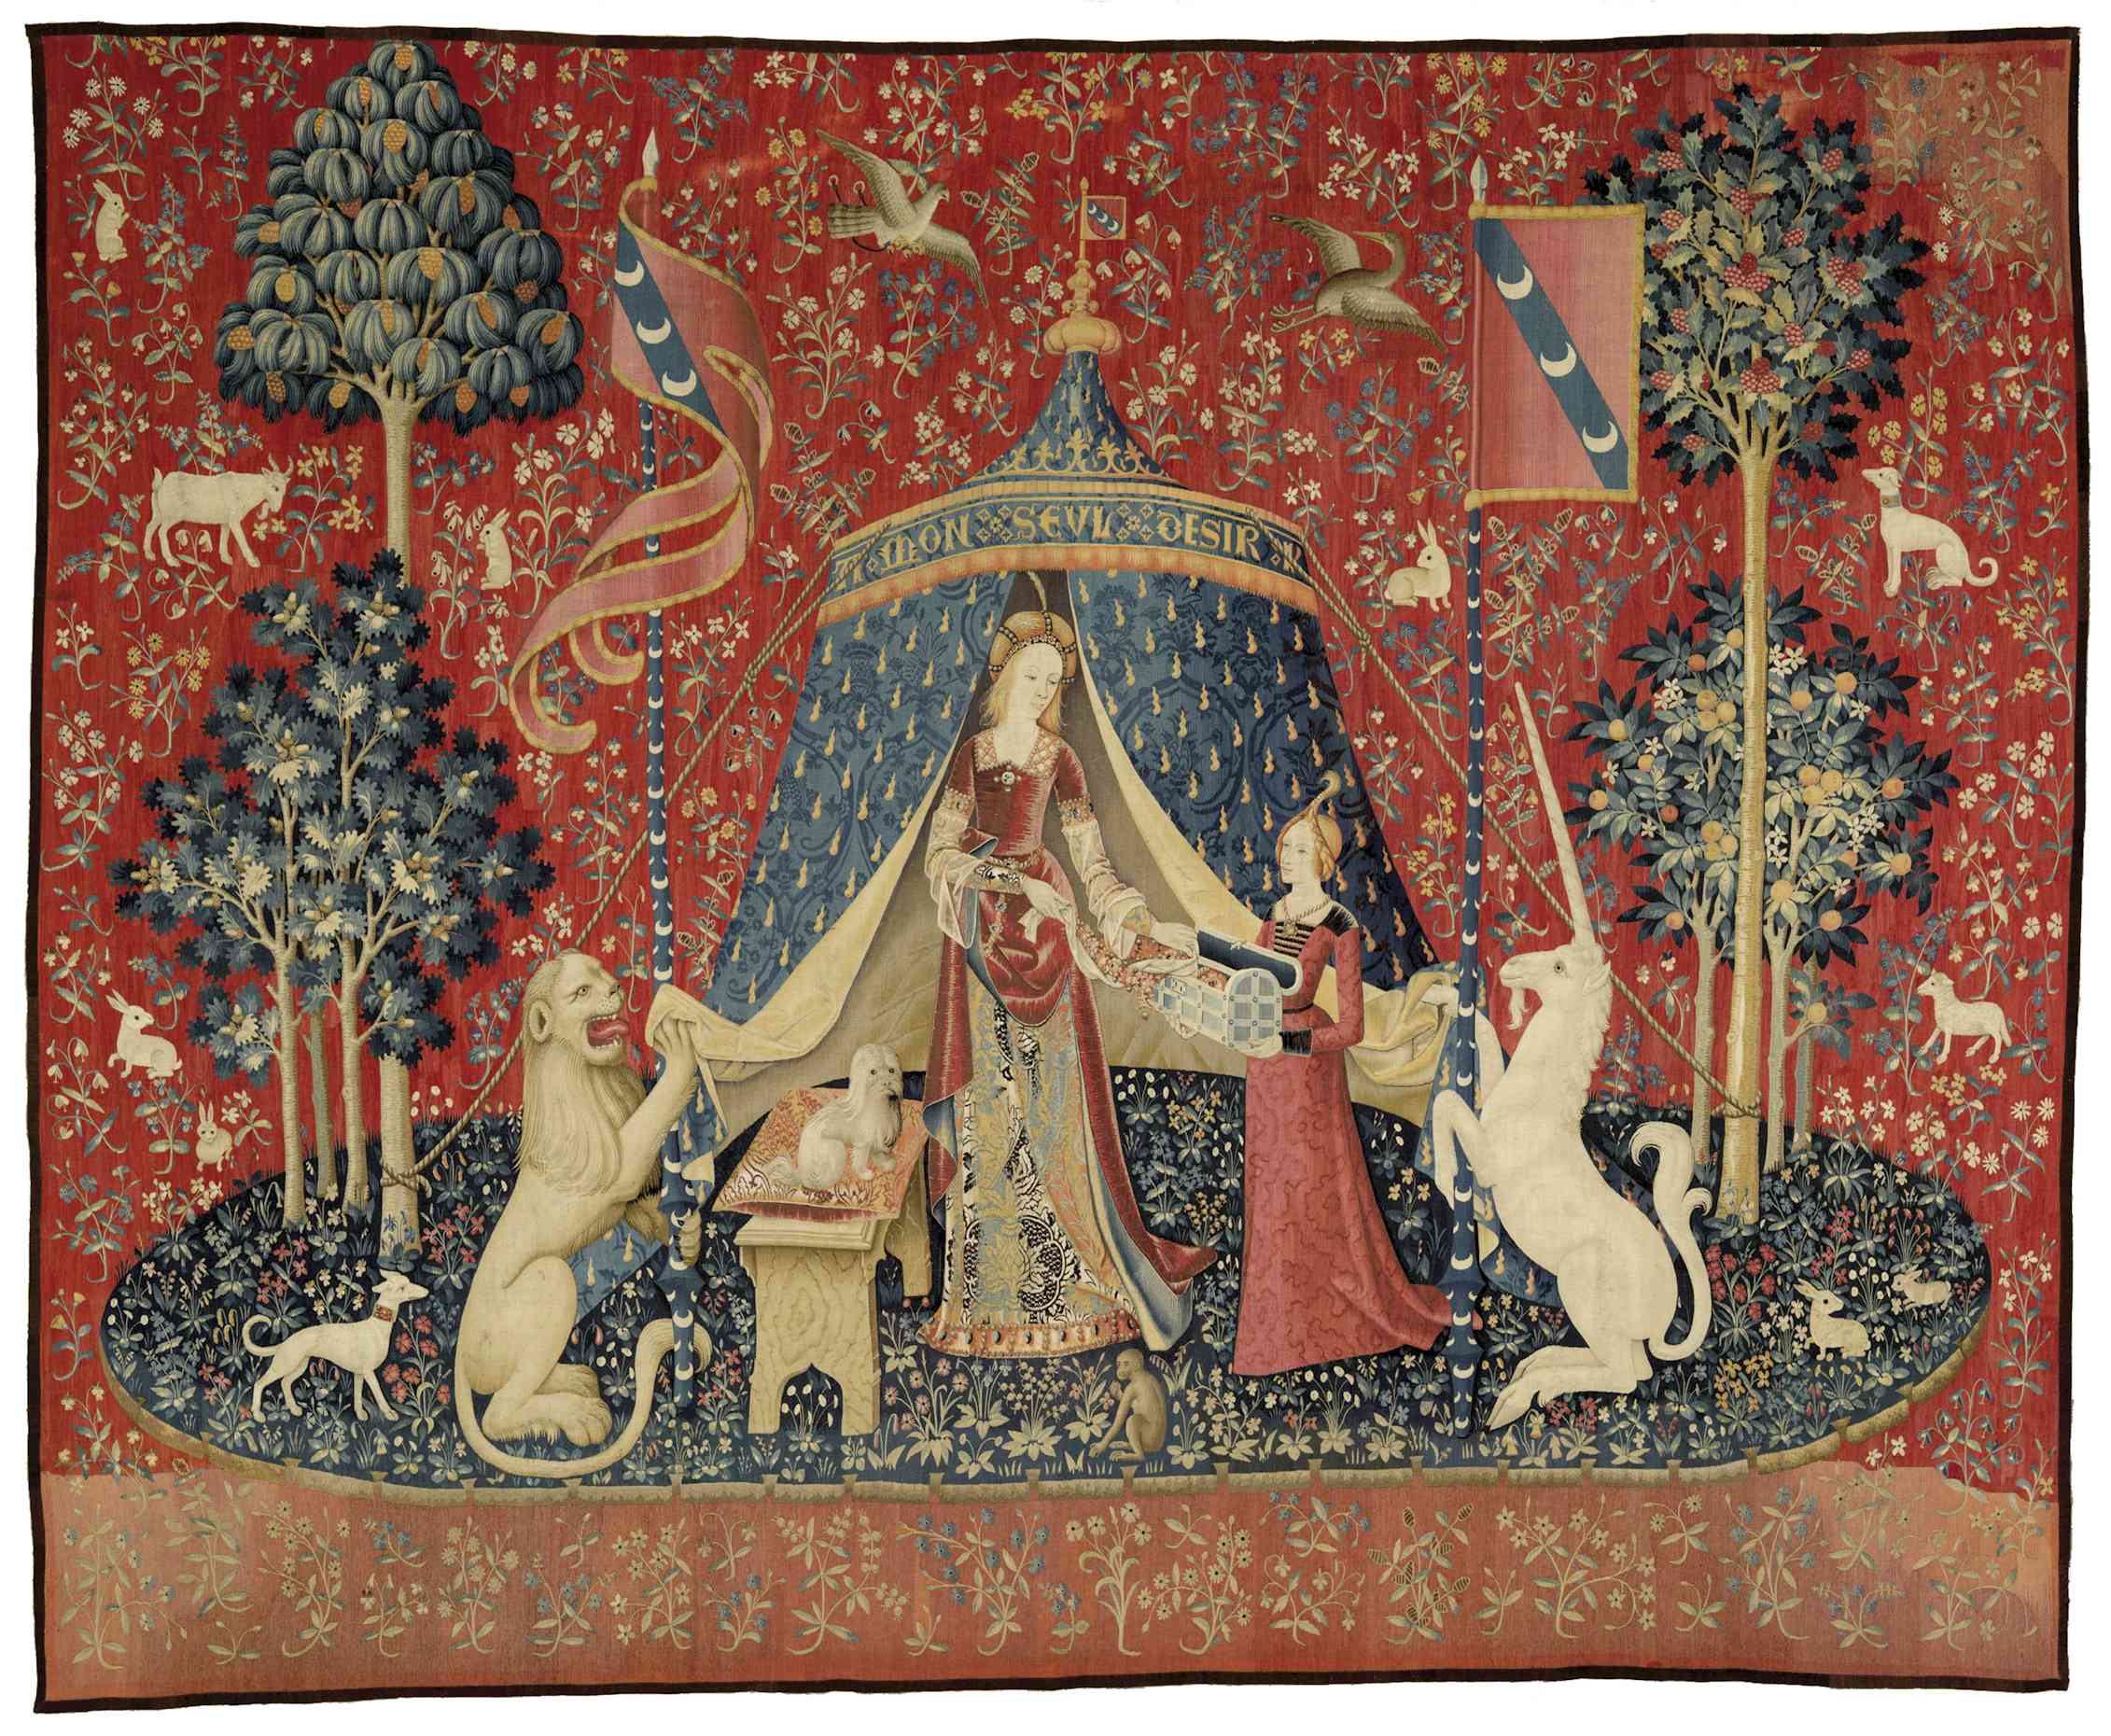 Explainer: the symbolism of The Lady and the Unicorn tapestry cycle